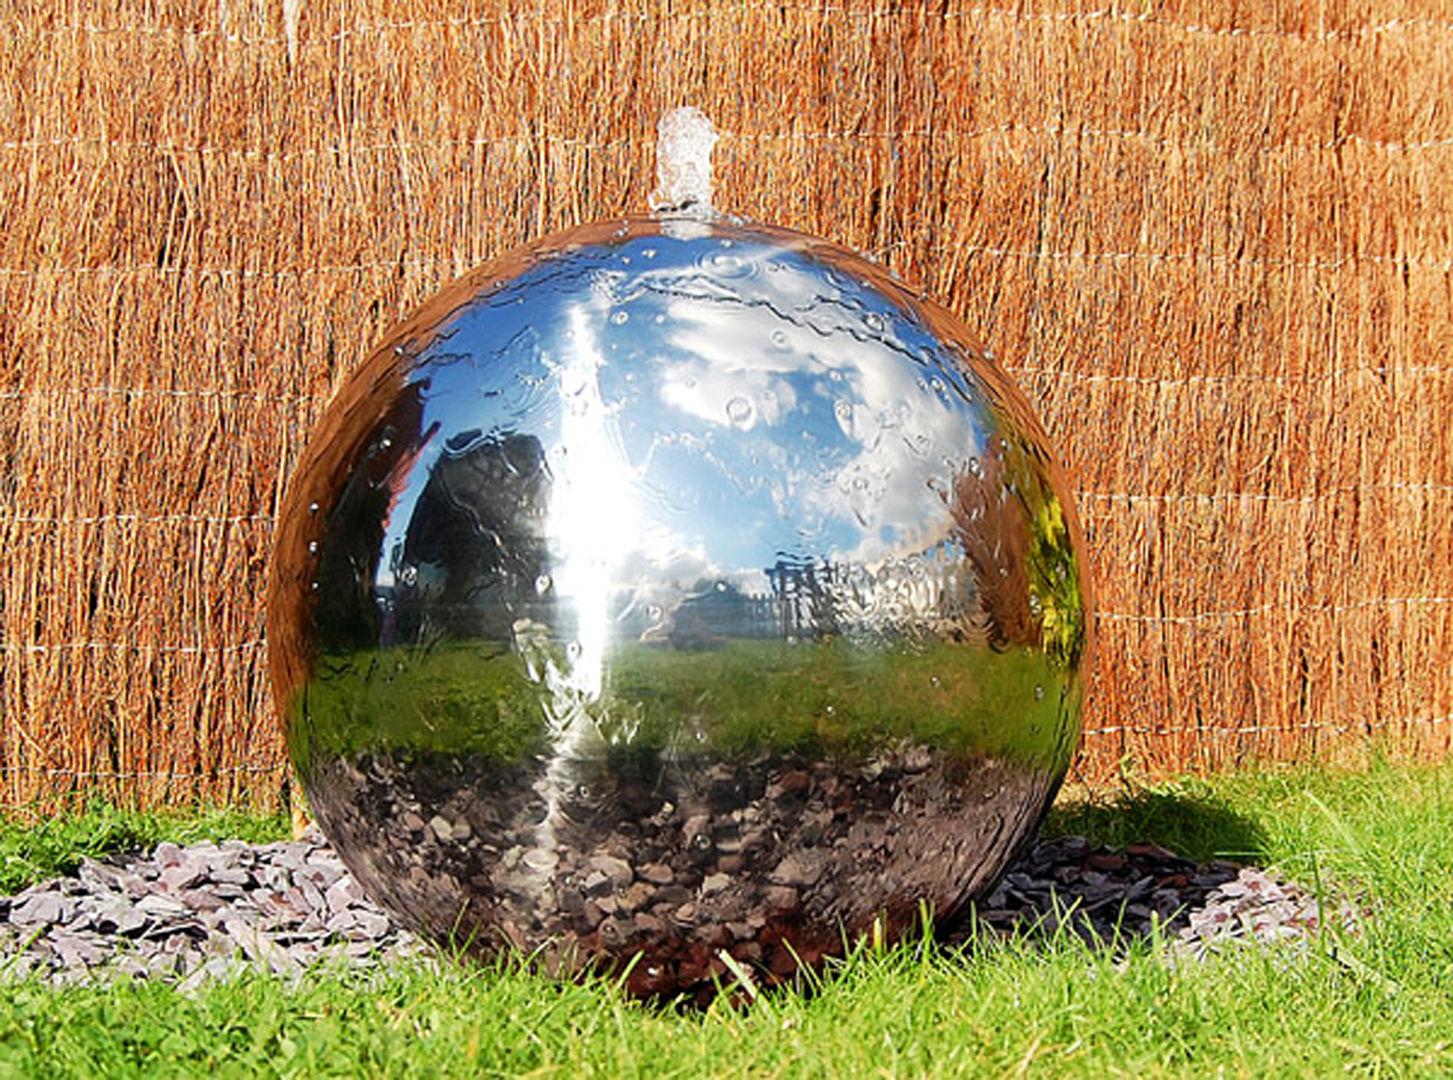 Polished 28cm Stainless Steel Sphere Water Feature Primrose モダンな庭 アクセサリー＆デコレーション